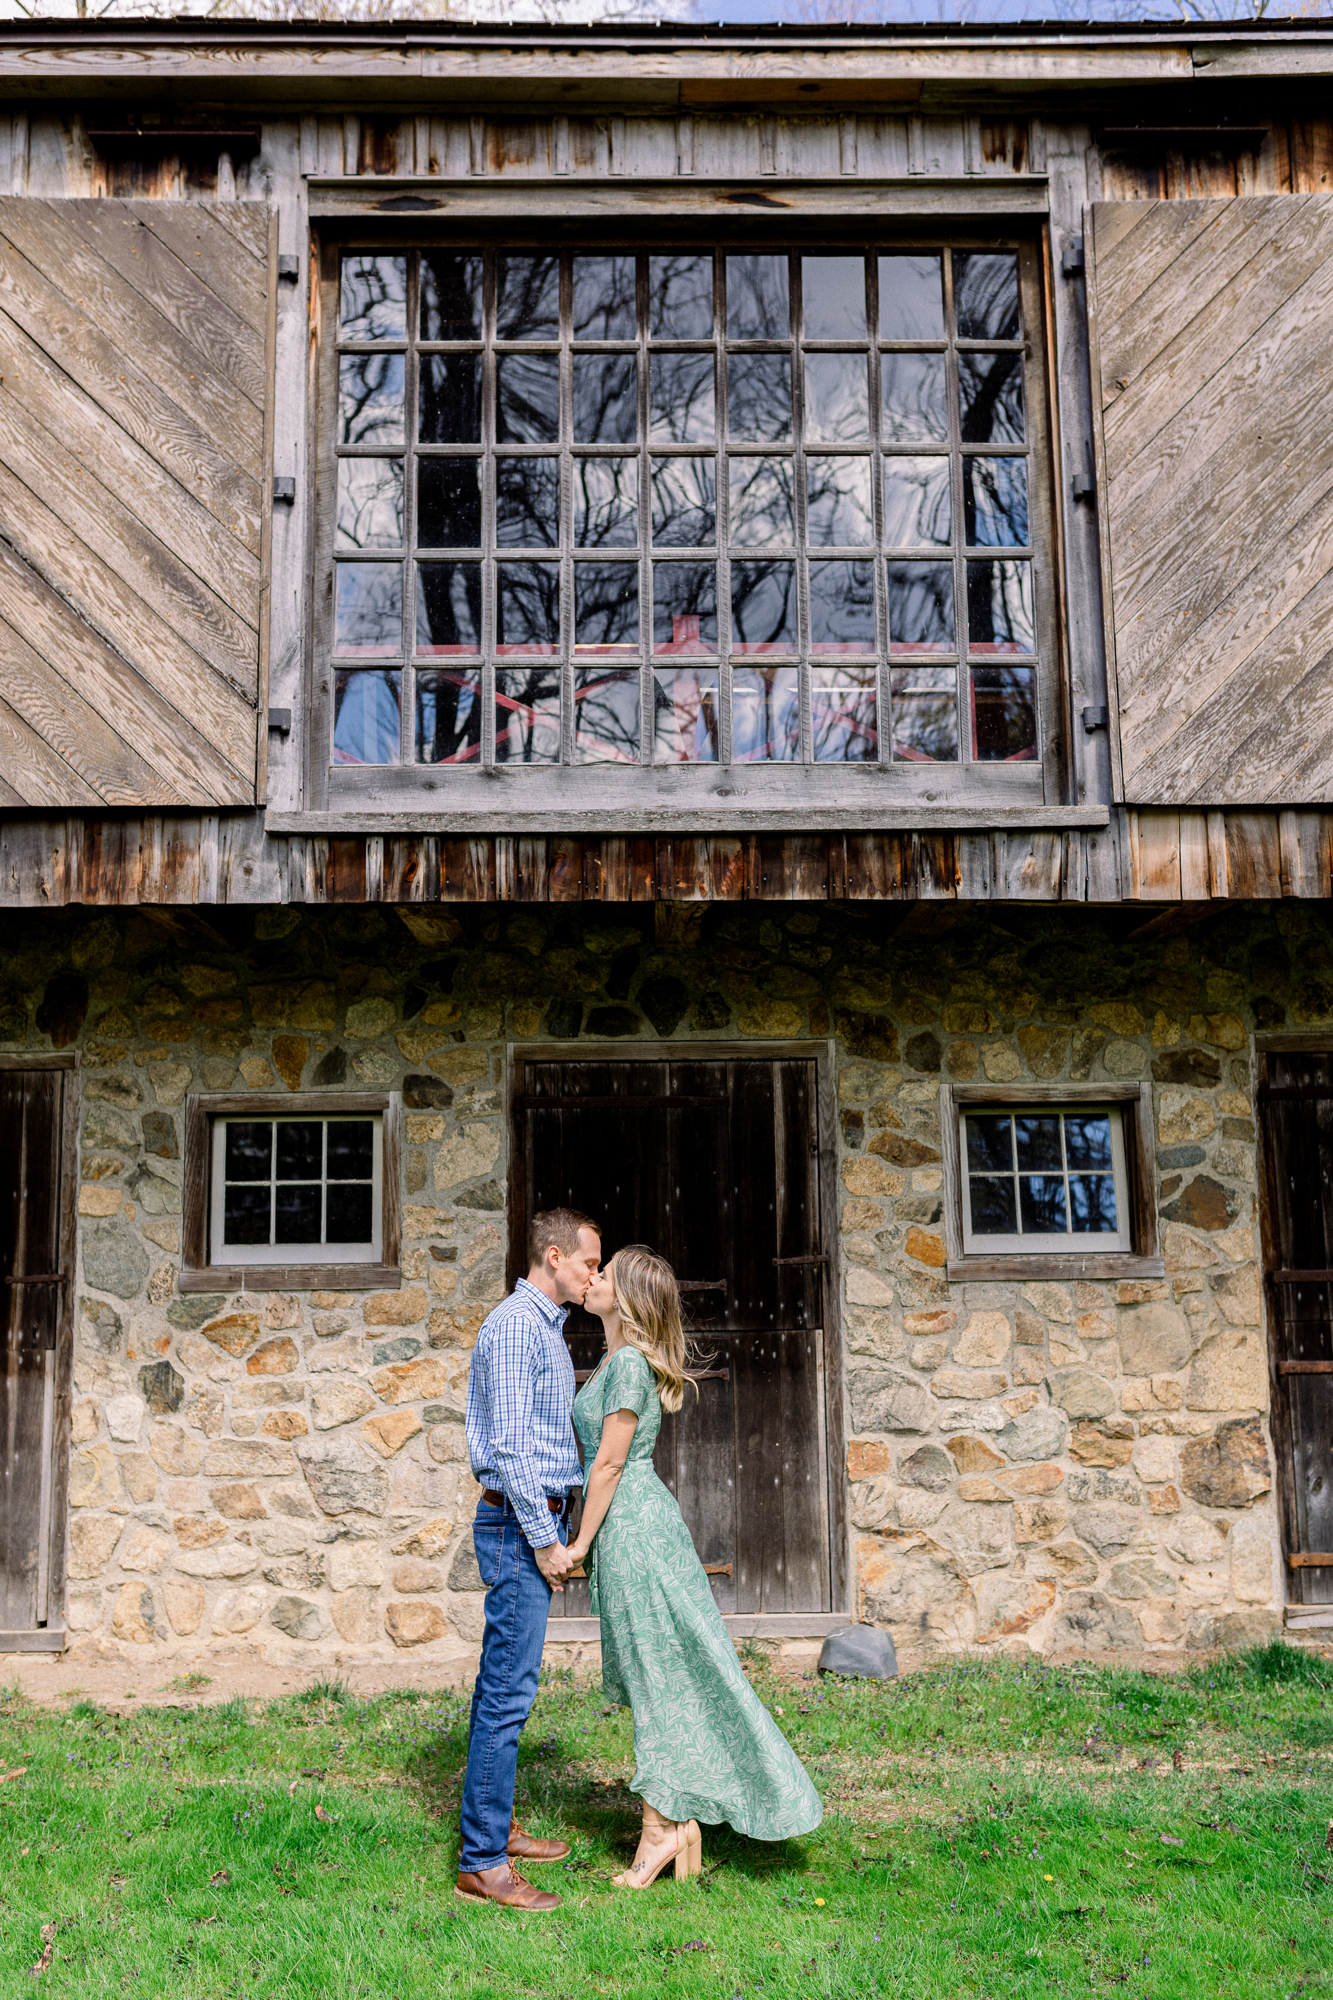 Rustic Waterloo Village Engagement Photos in Springy New Jersey